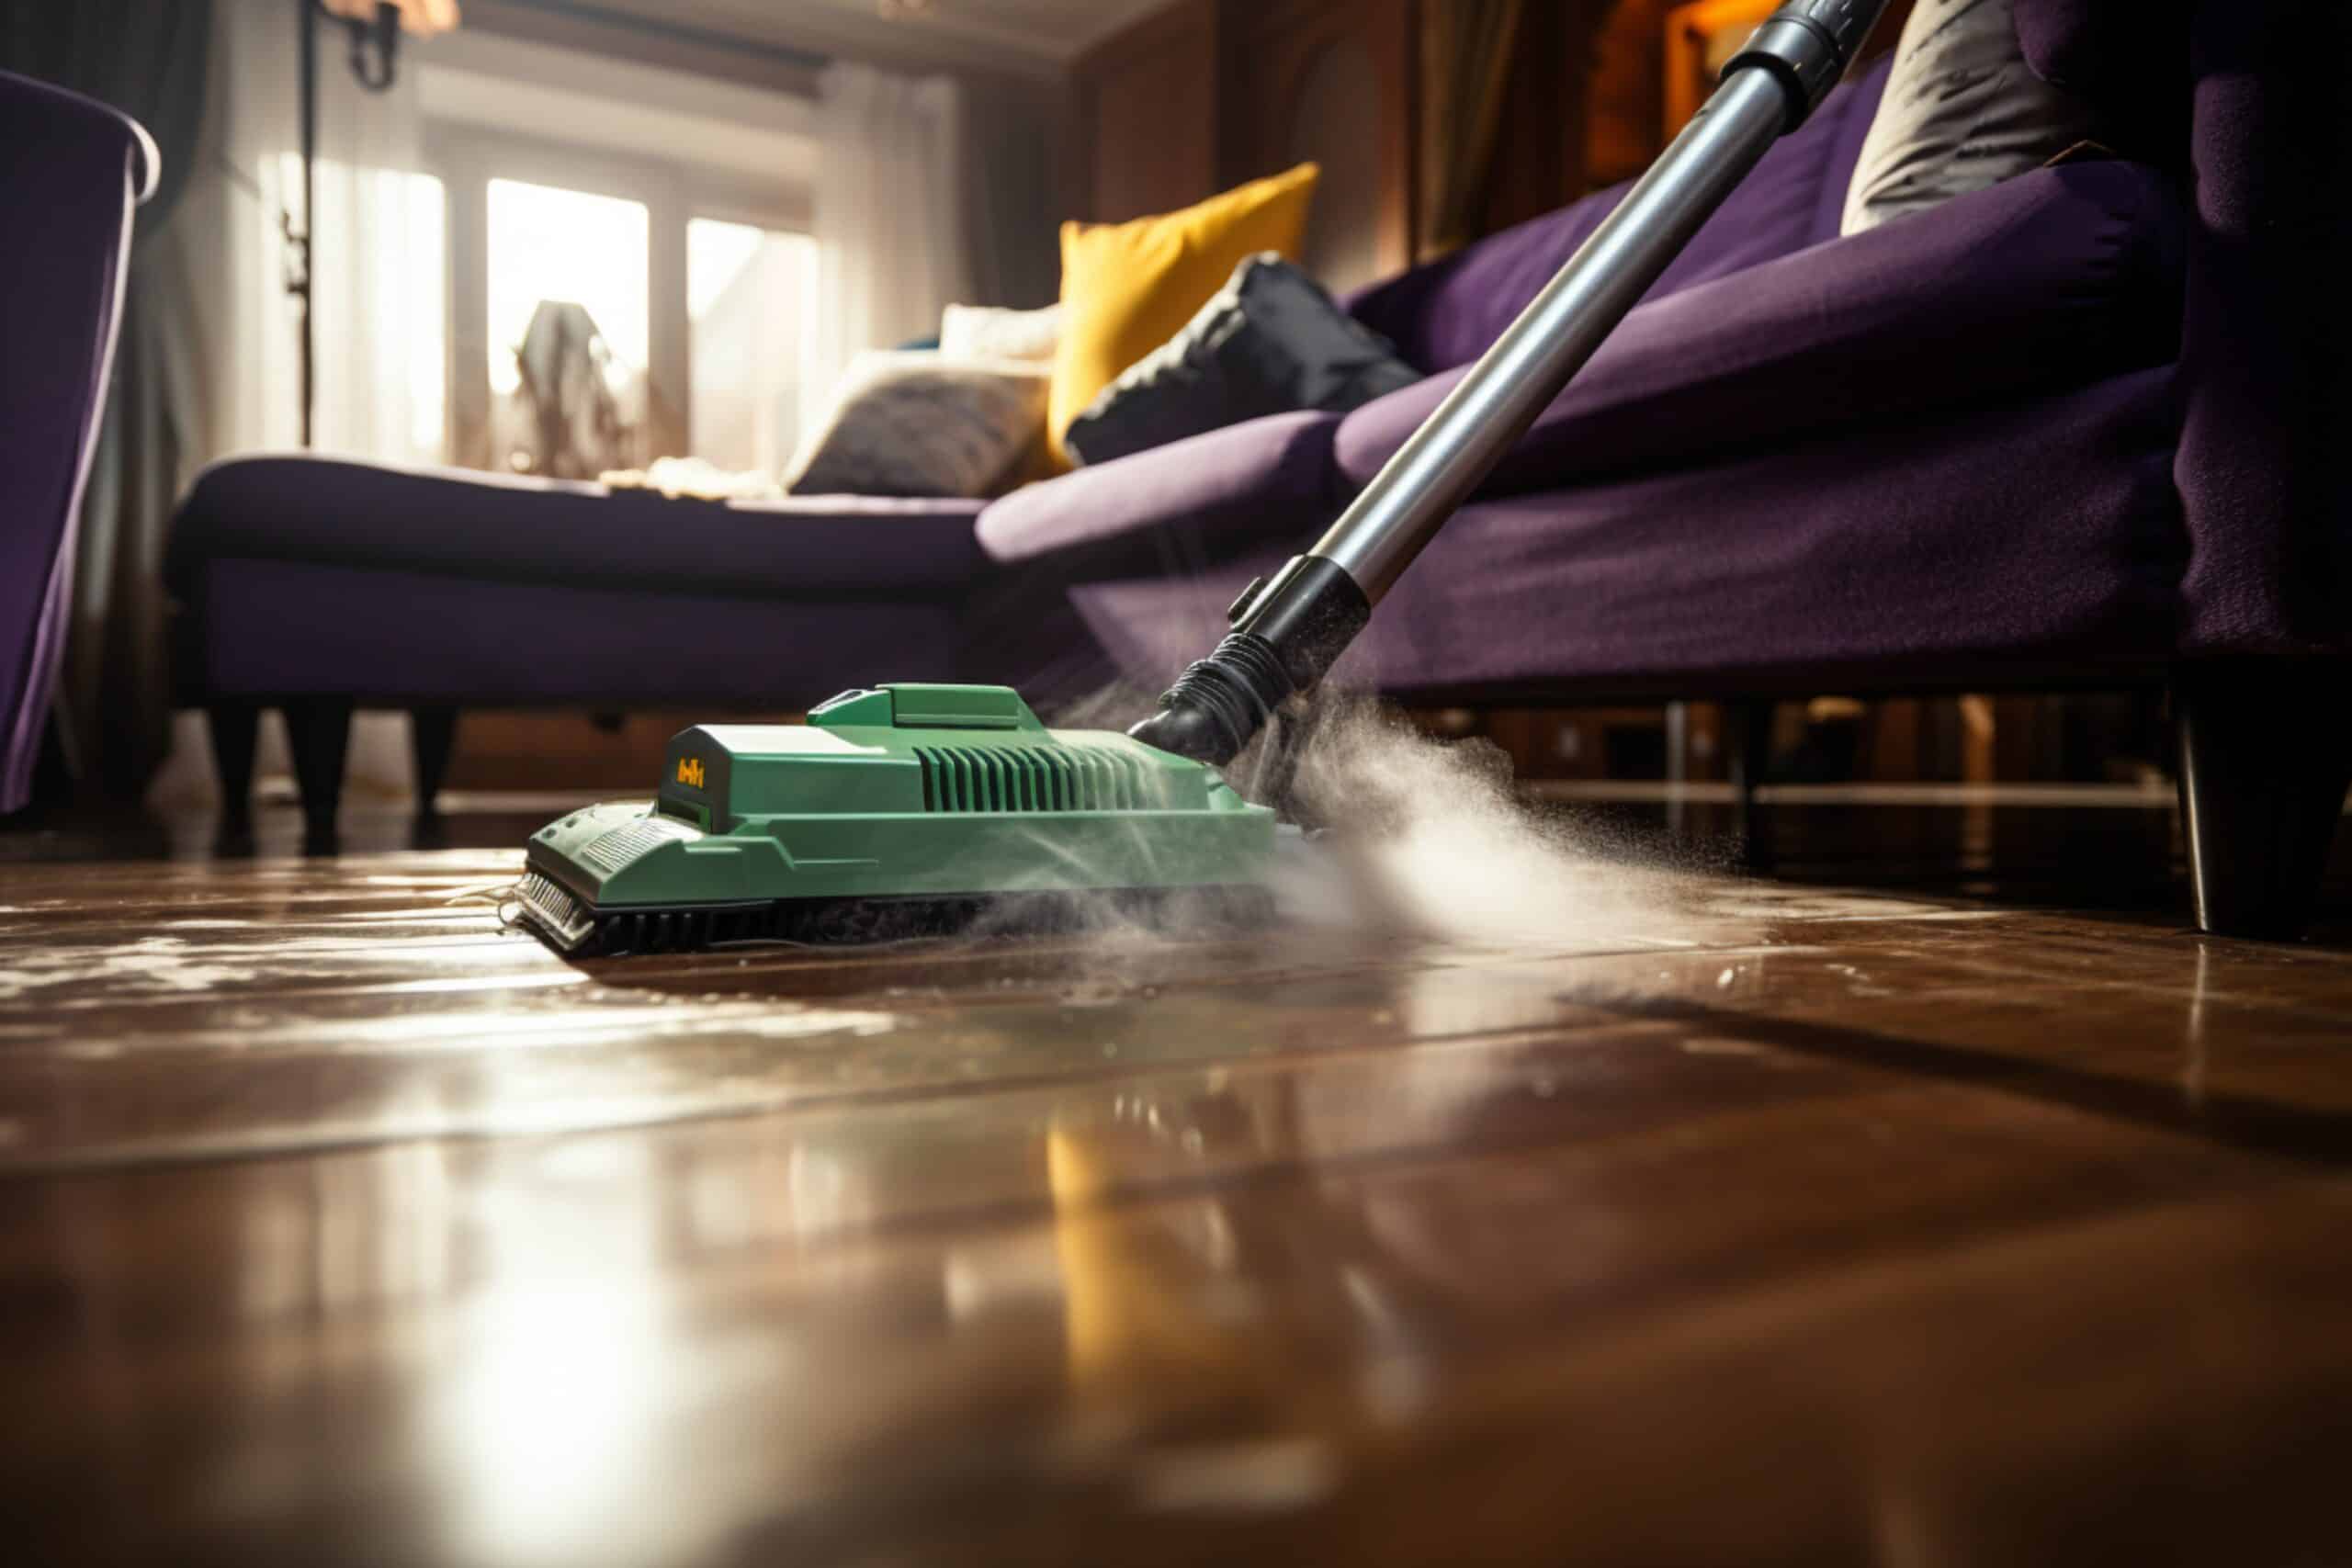 www.appr.com : Can I rent a steam cleaner, or should I invest in buying one?